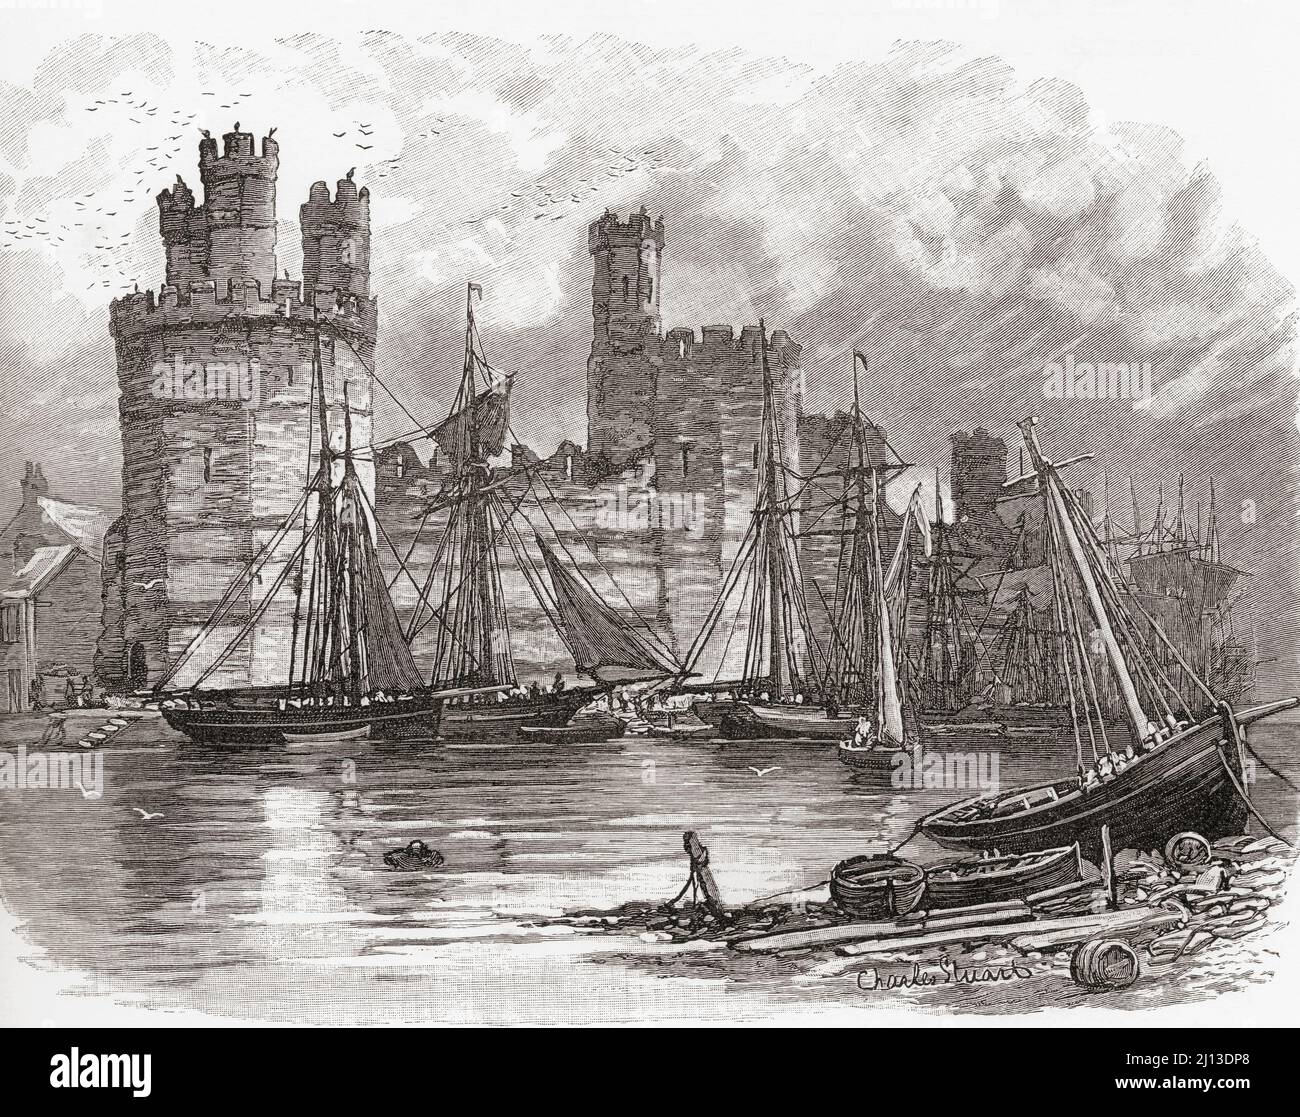 Caernarfon Castle, aka Carnarvon Castle or Caernarvon Castle, Caernarfon, Gwynedd, north-west Wales, seen from across the River Seiont in the 19th century.  From Welsh Pictures, published 1880. Stock Photo